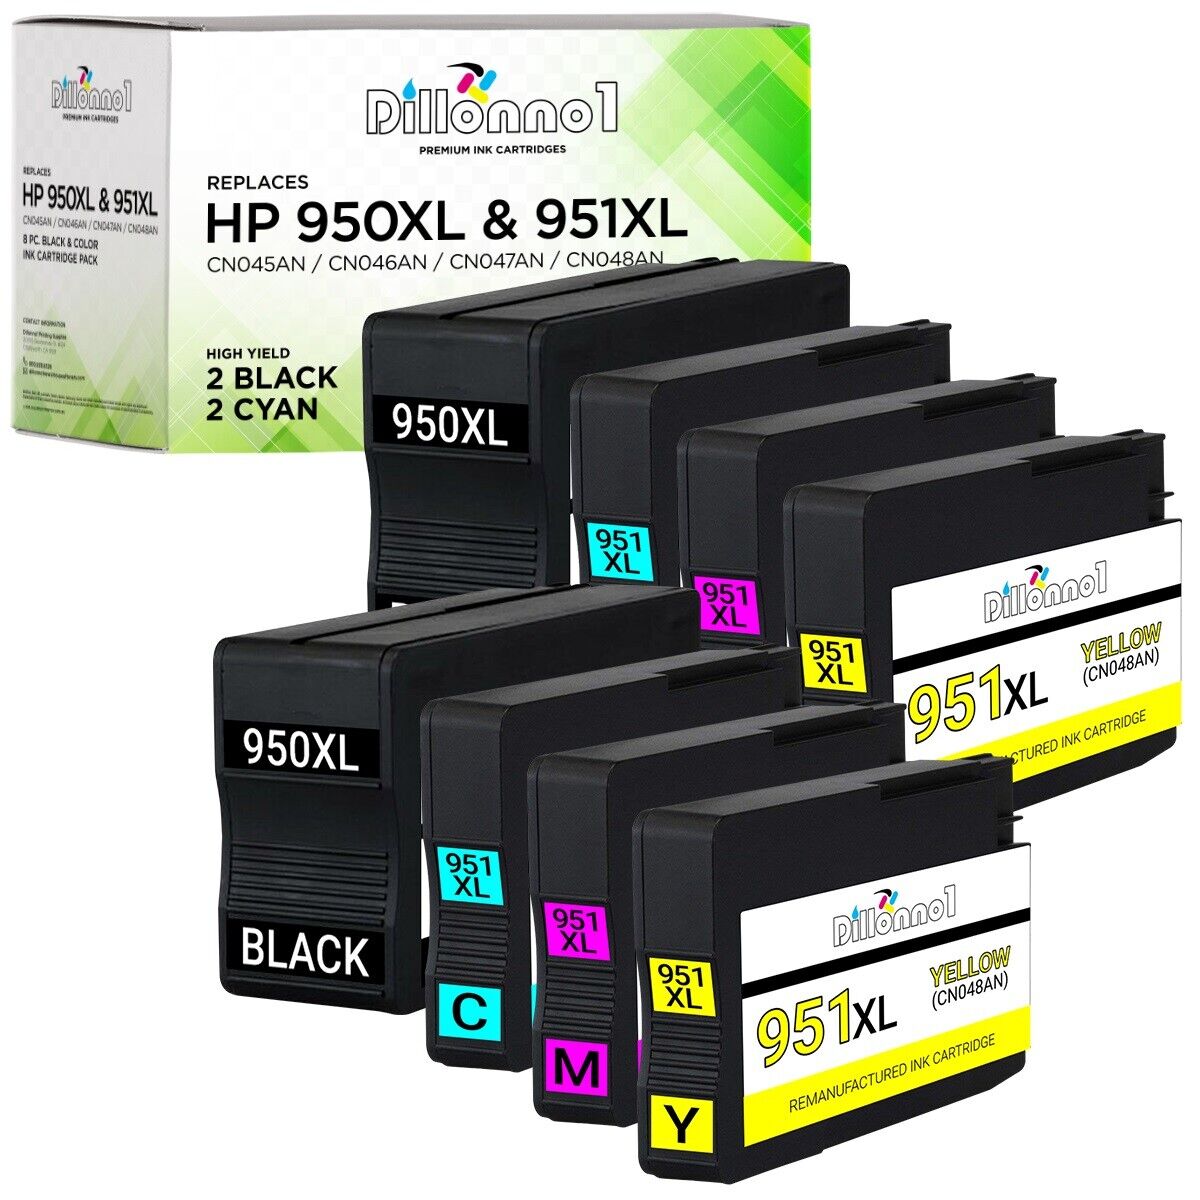 8 PACK for HP 950 951XL Ink Cartridge fits Officejet Pro 251dw 276dw 8100 8600